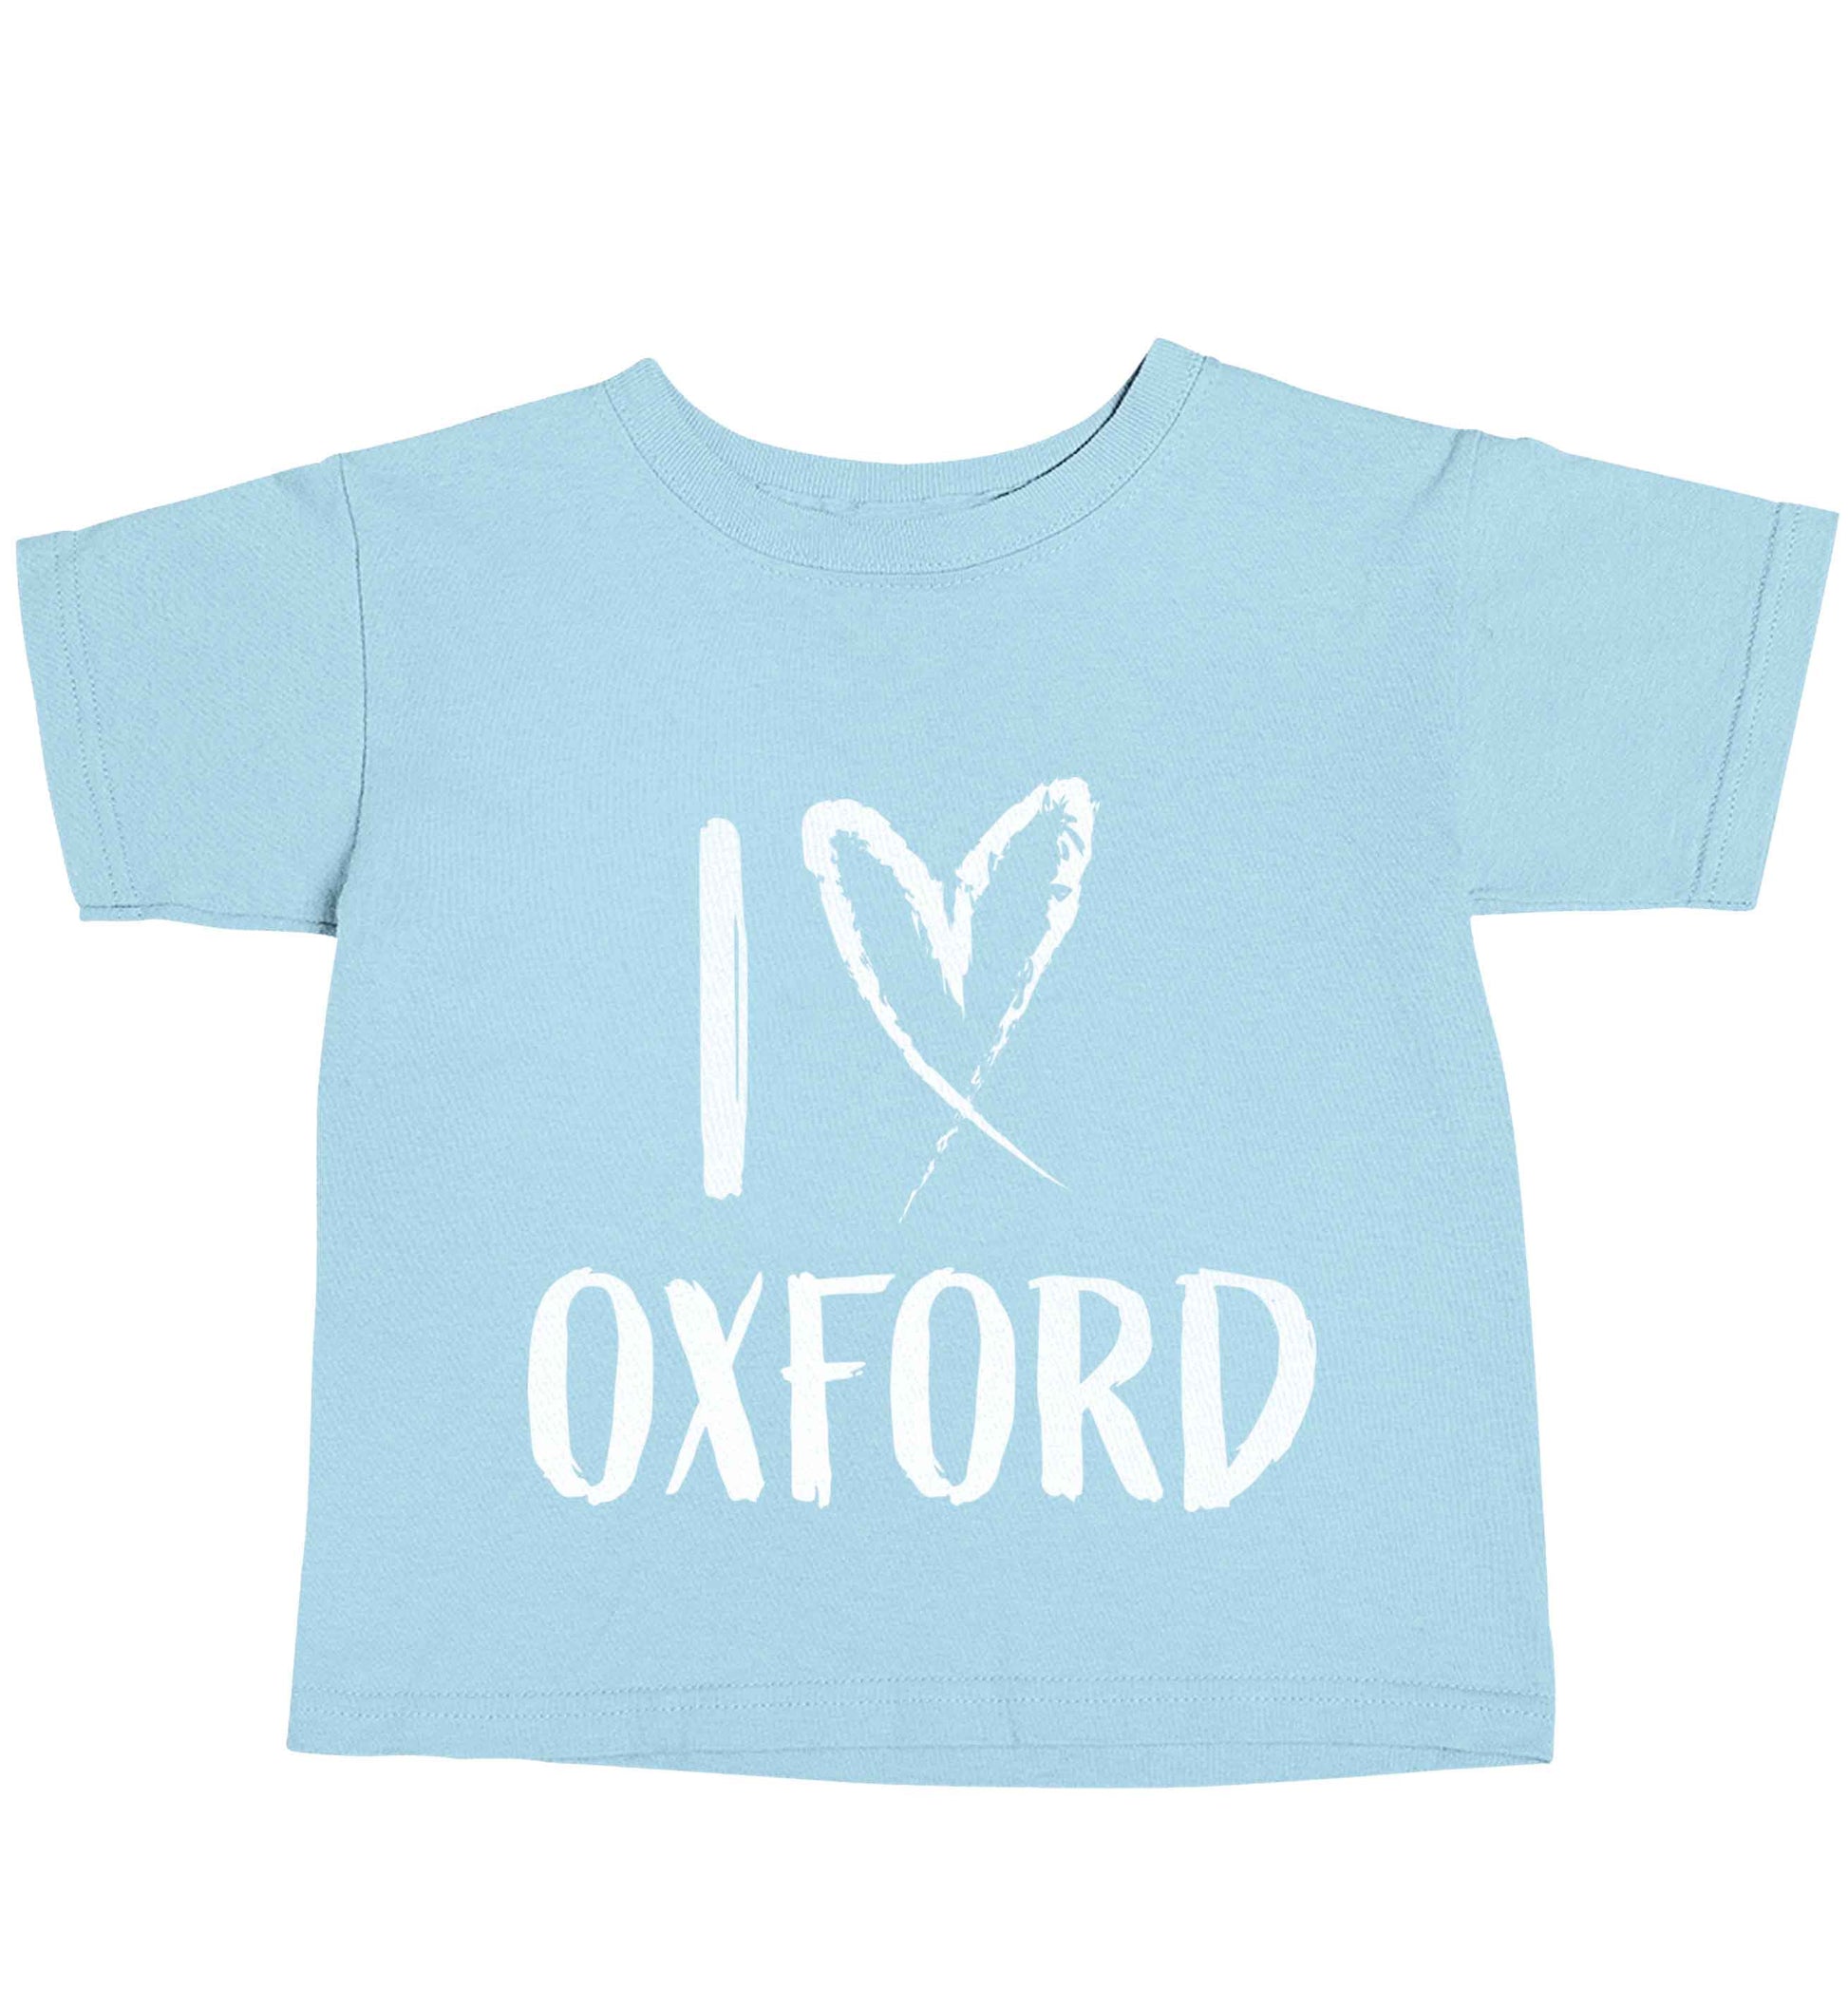 I love Oxford light blue baby toddler Tshirt 2 Years